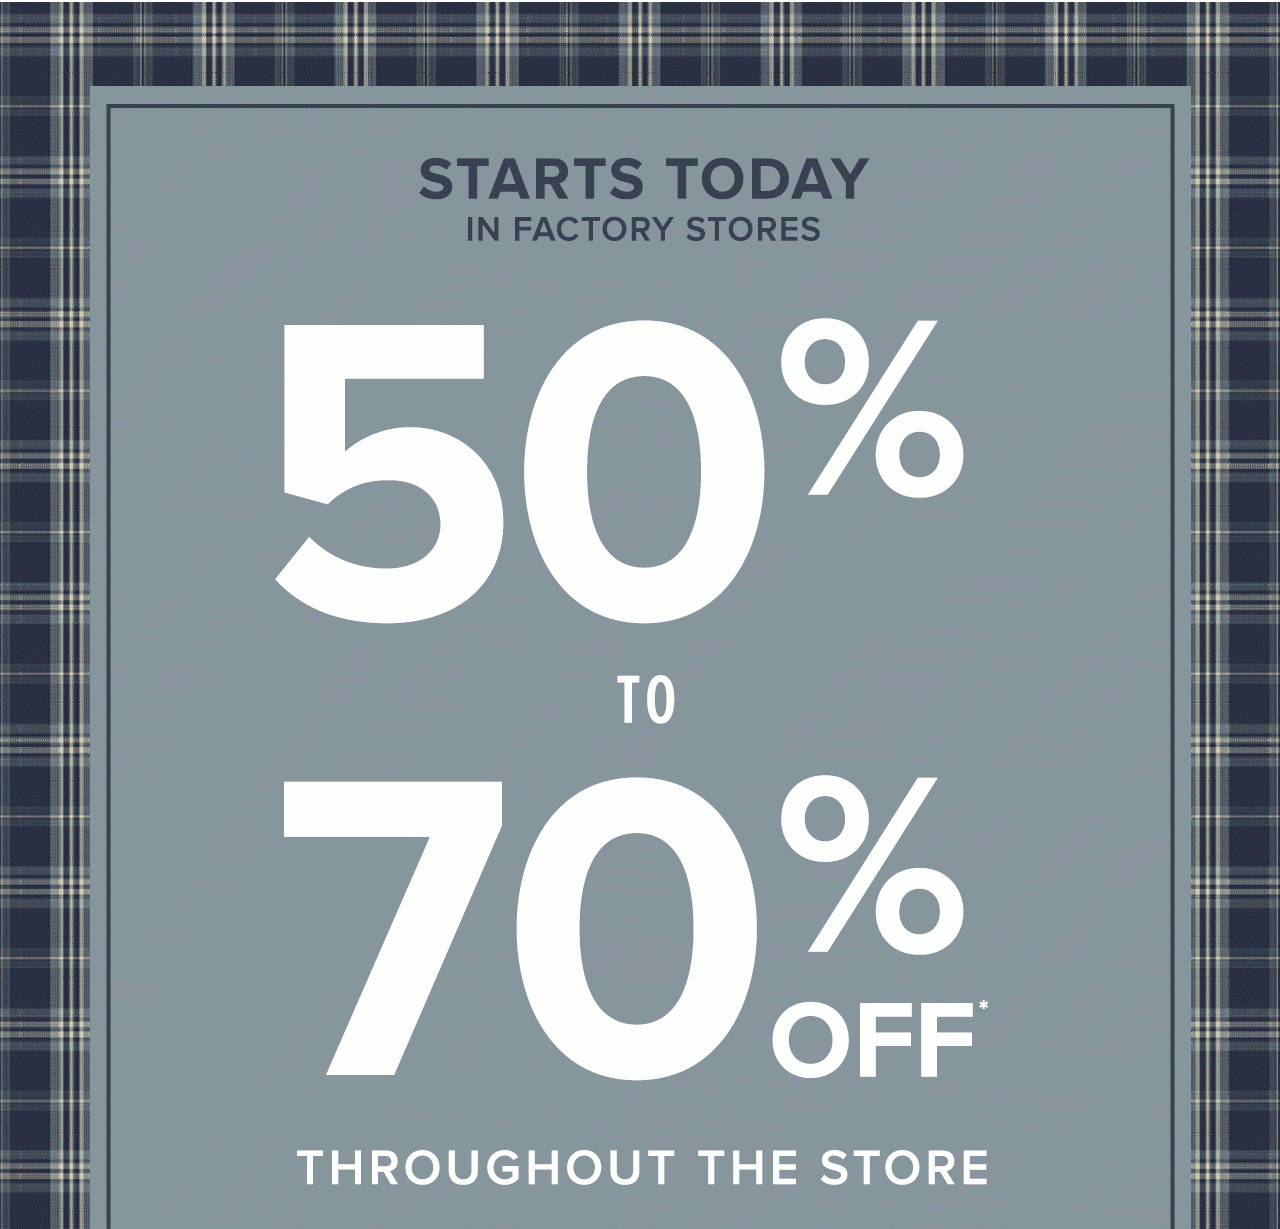 Starts Today In Factory Stores 50% to 70% Off Throughout The Store.